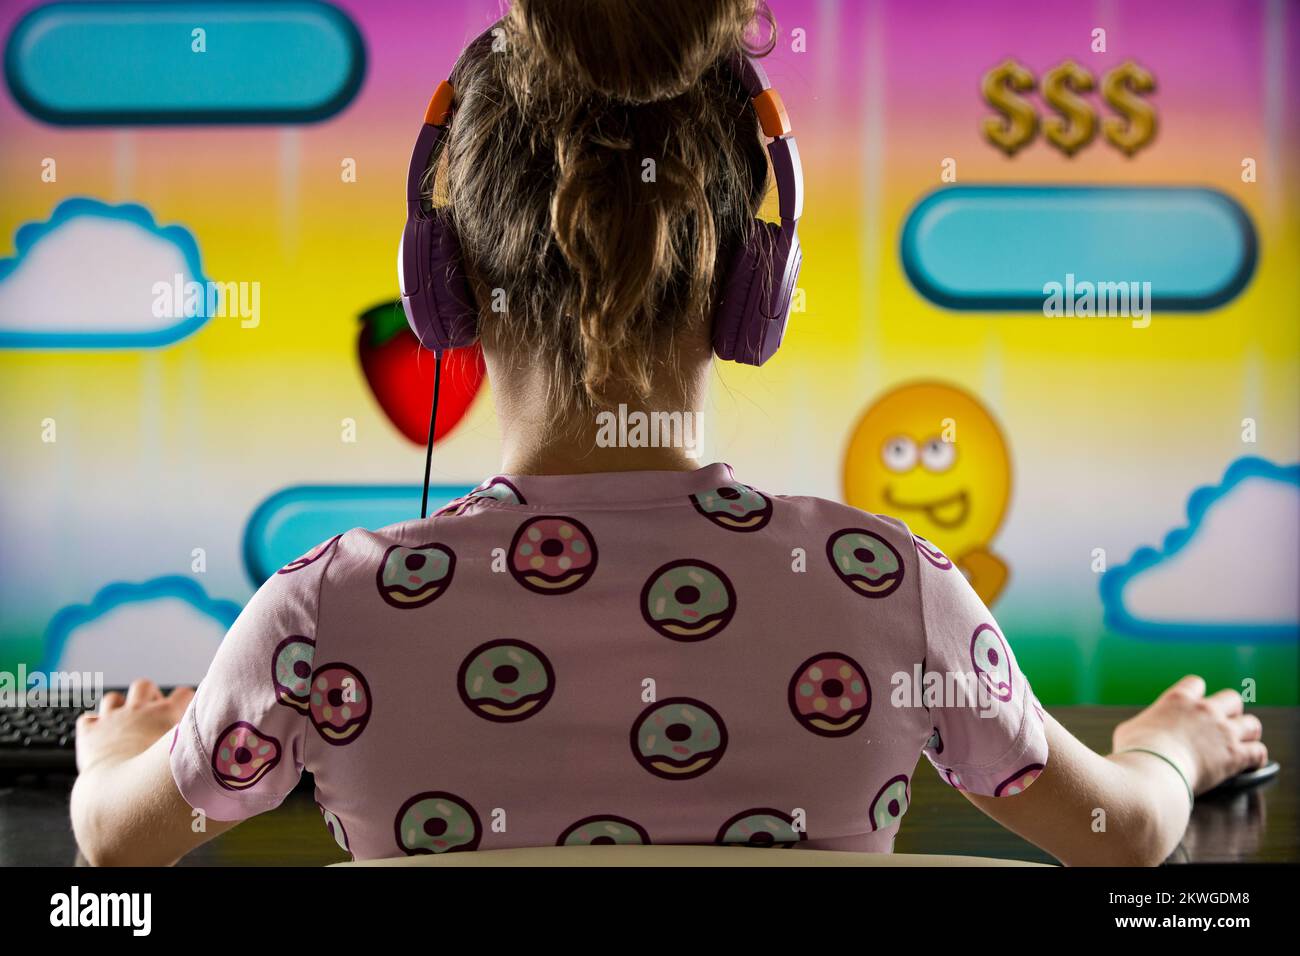 A child or teenager is playing computer video games on a large screen. Online video game technology and teen gaming addiction Stock Photo